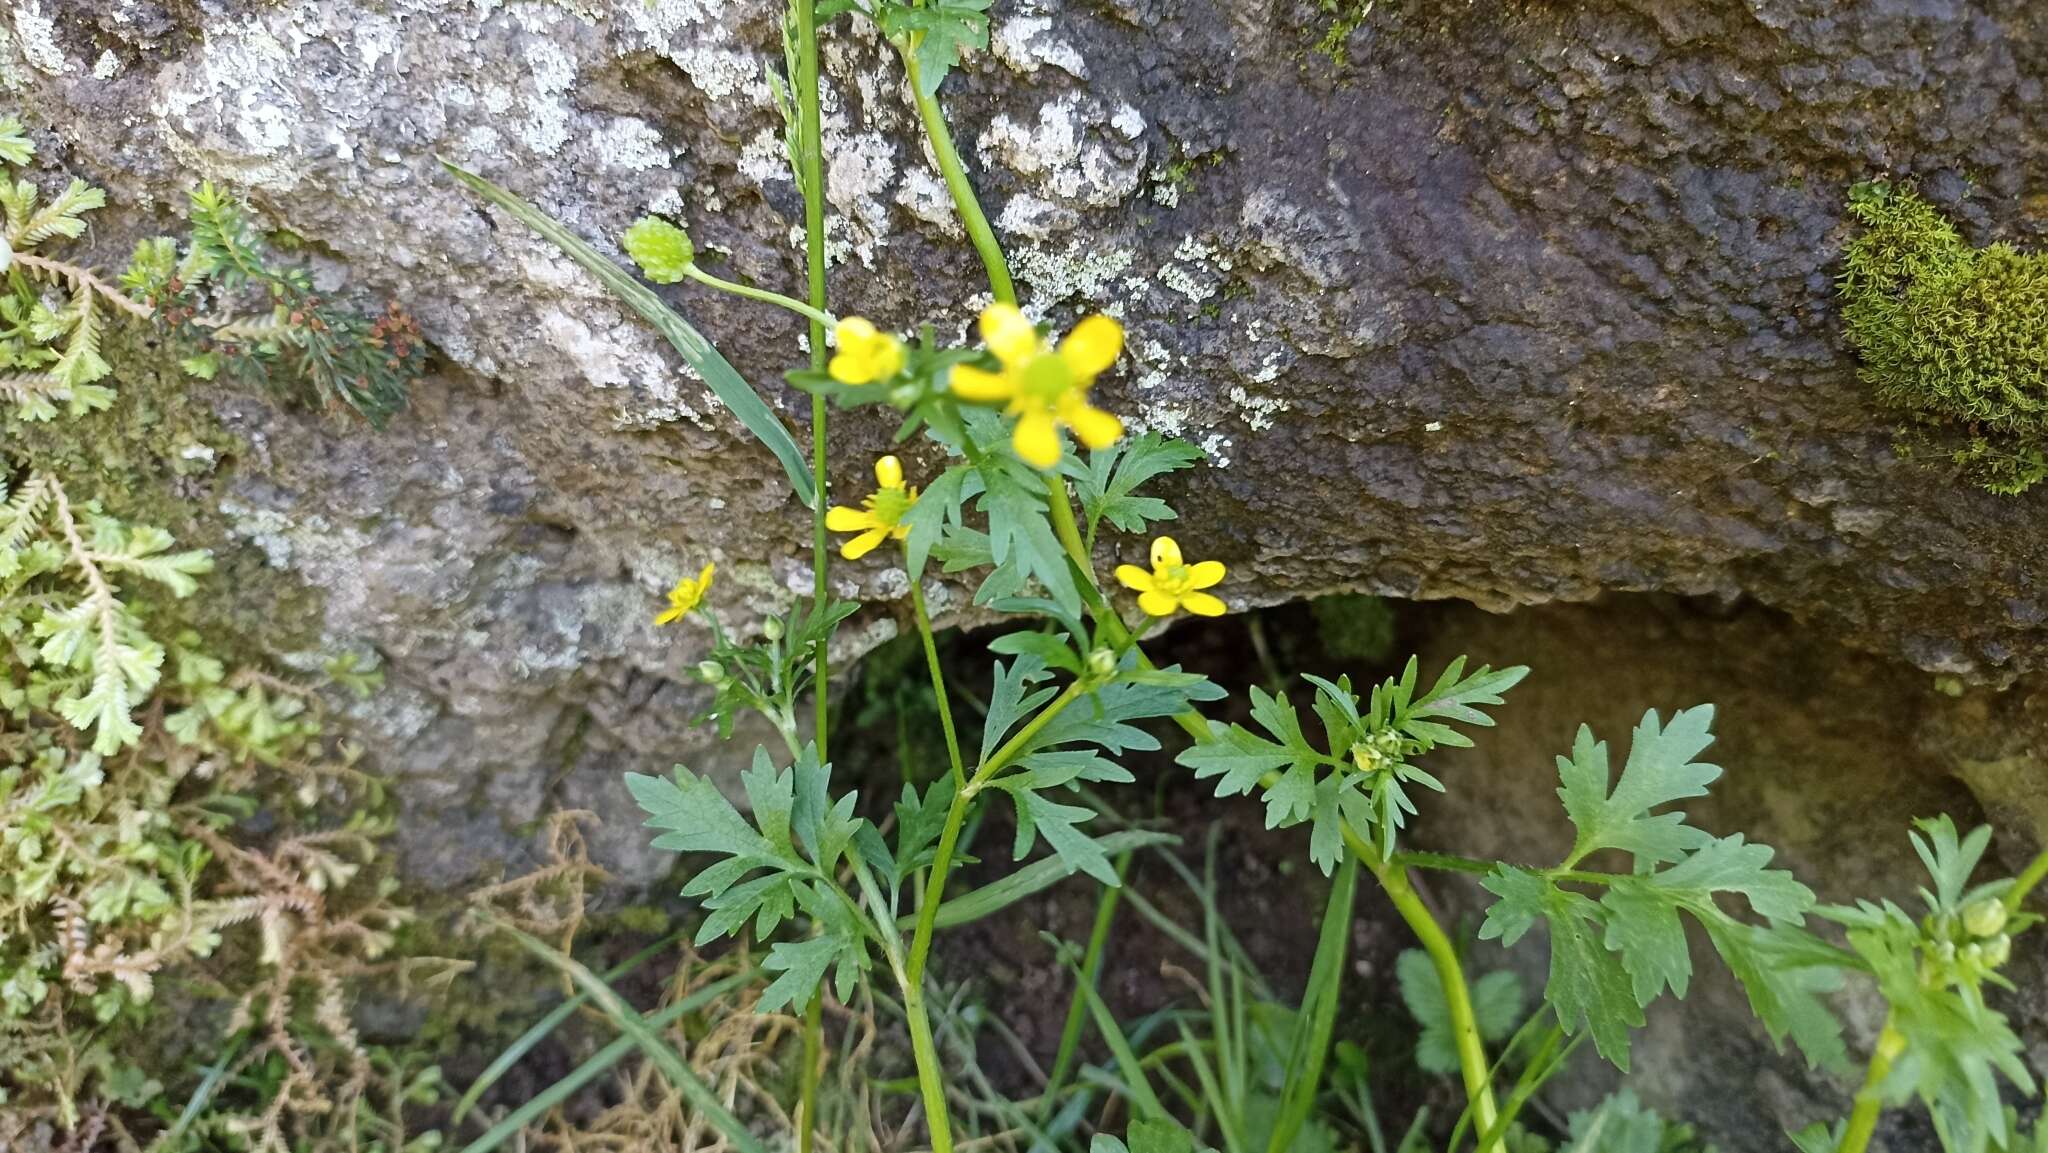 Image of threelobe buttercup